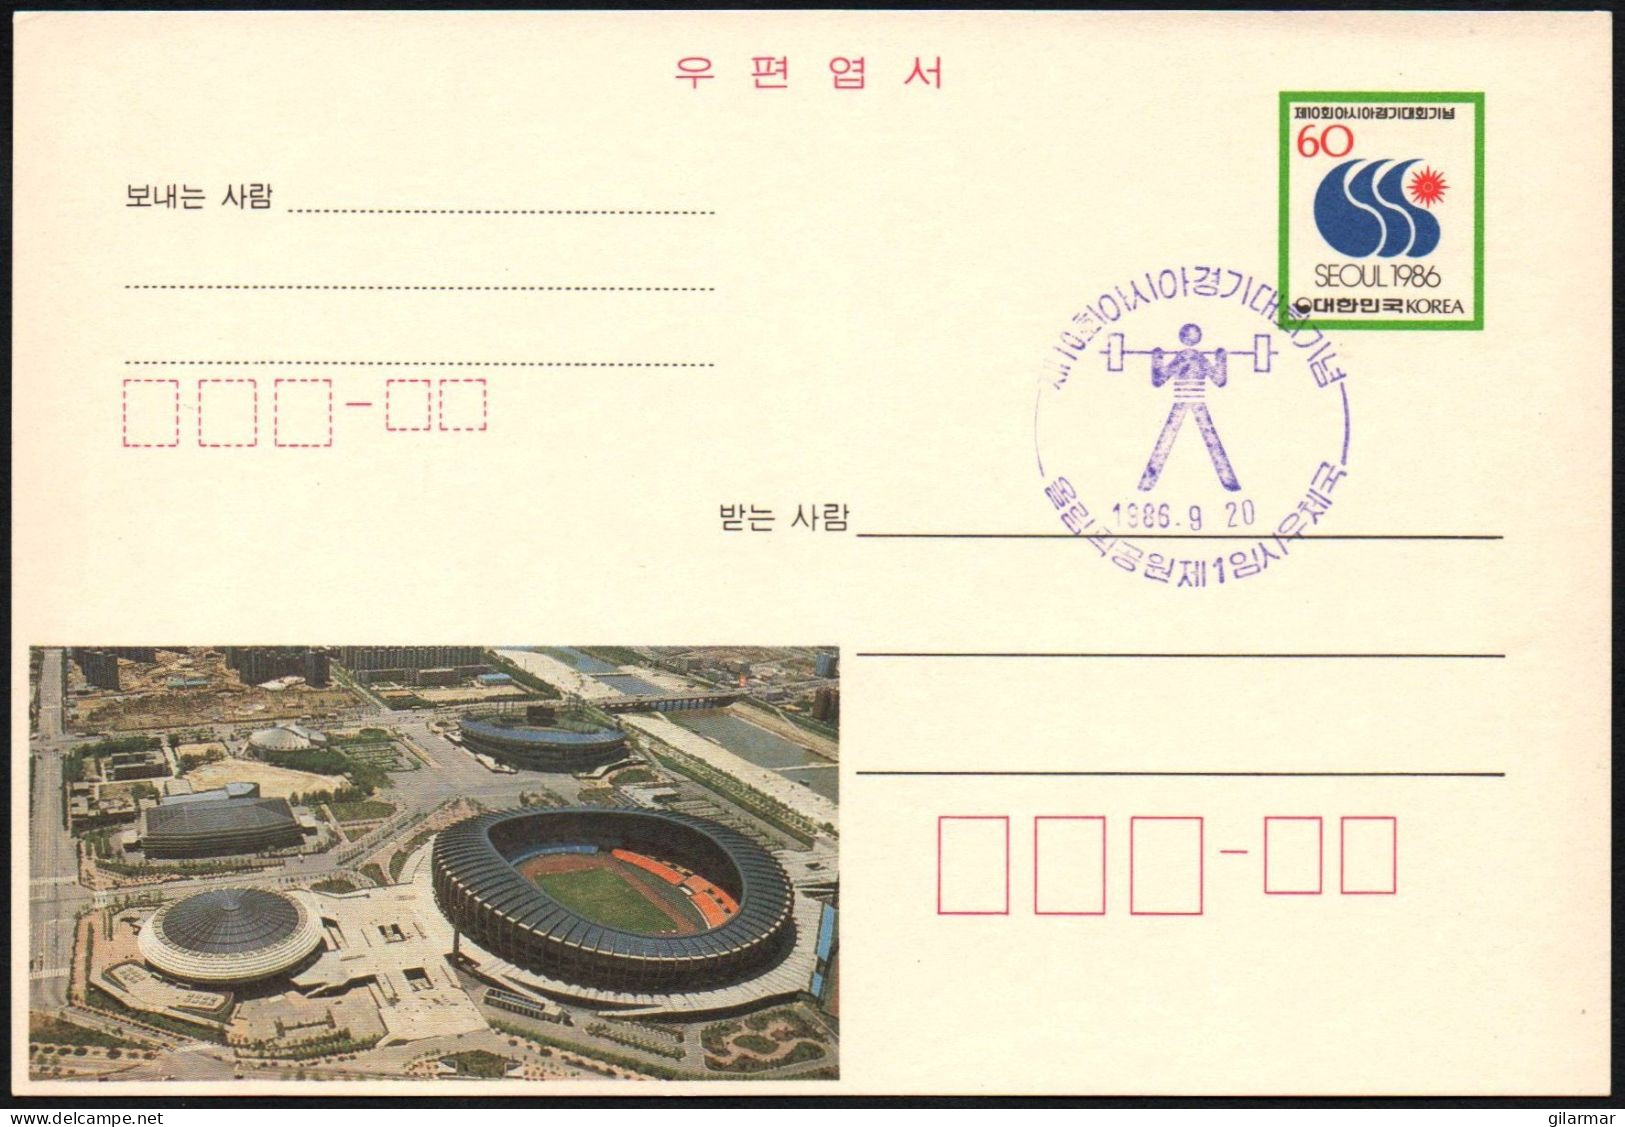 SOUTH KOREA 1986 - 10th ASIAN GAMES - WEIGHTLIFTING - PURPLE CANCELLATION - STATIONARY: OLYMPIC COMPLEX - G - Weightlifting